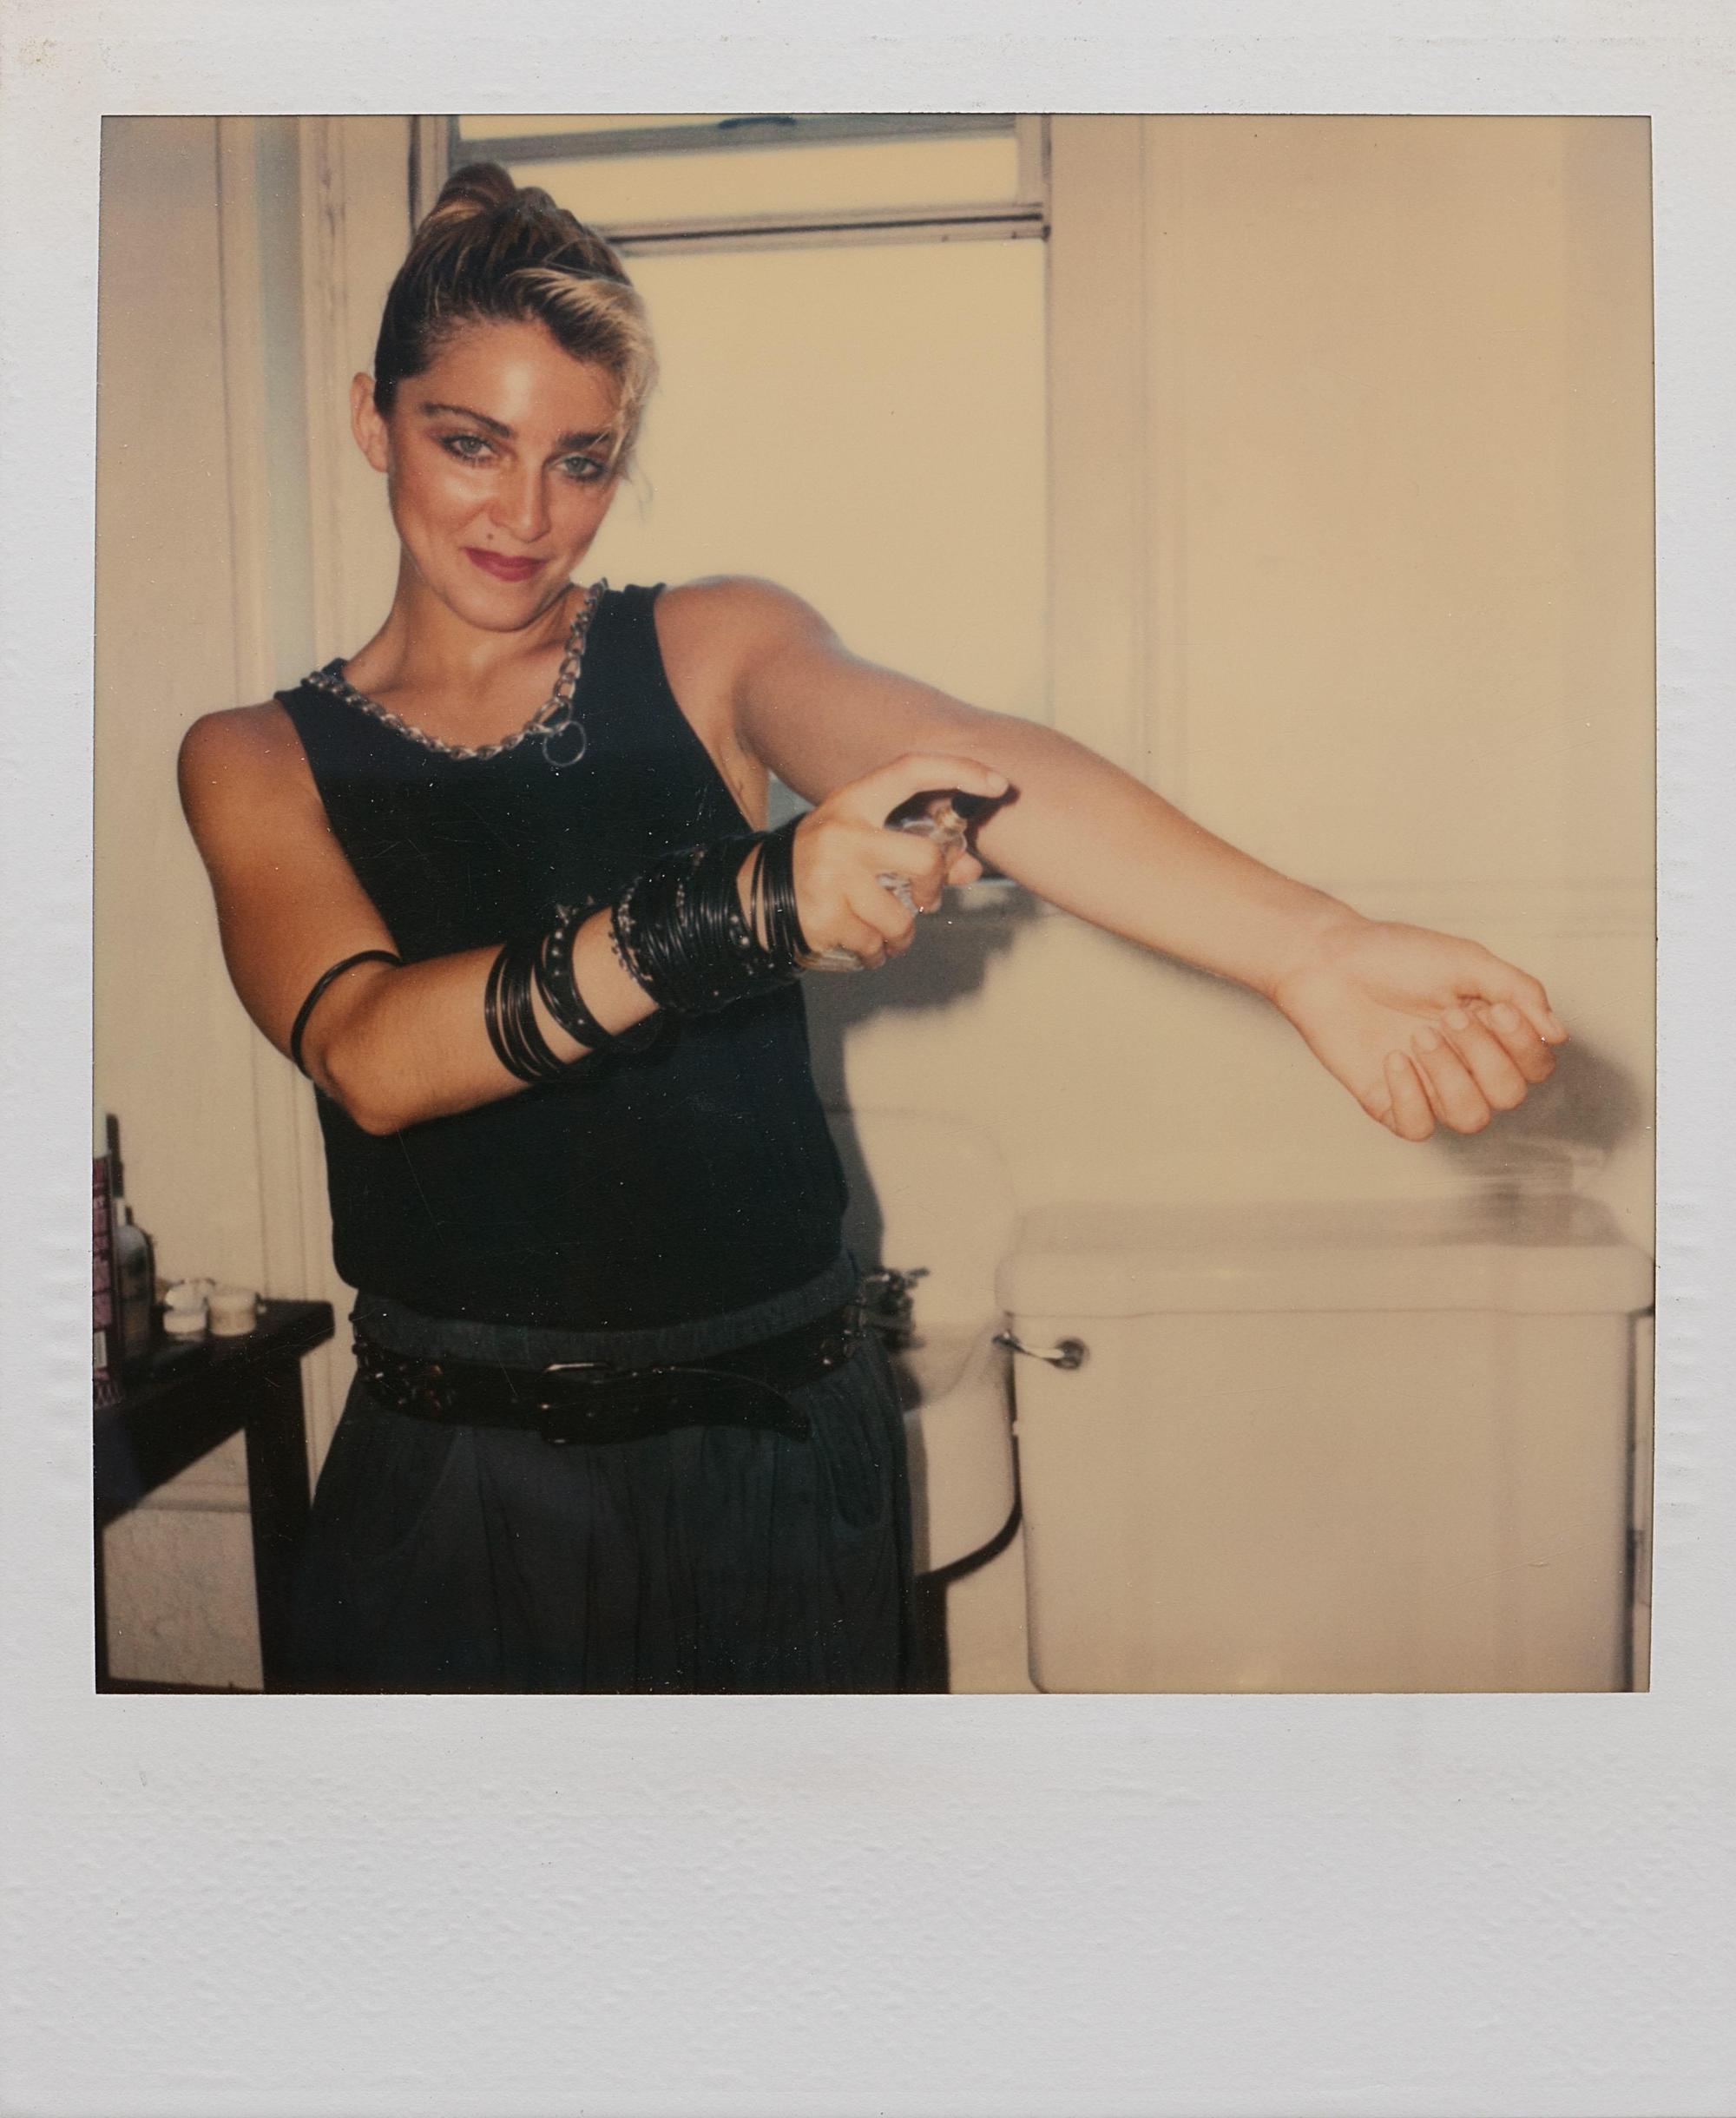 66-long-lost-casting-polaroids-of-madonna-show-a-mega-star-on-the-verge-body-image-1471356595